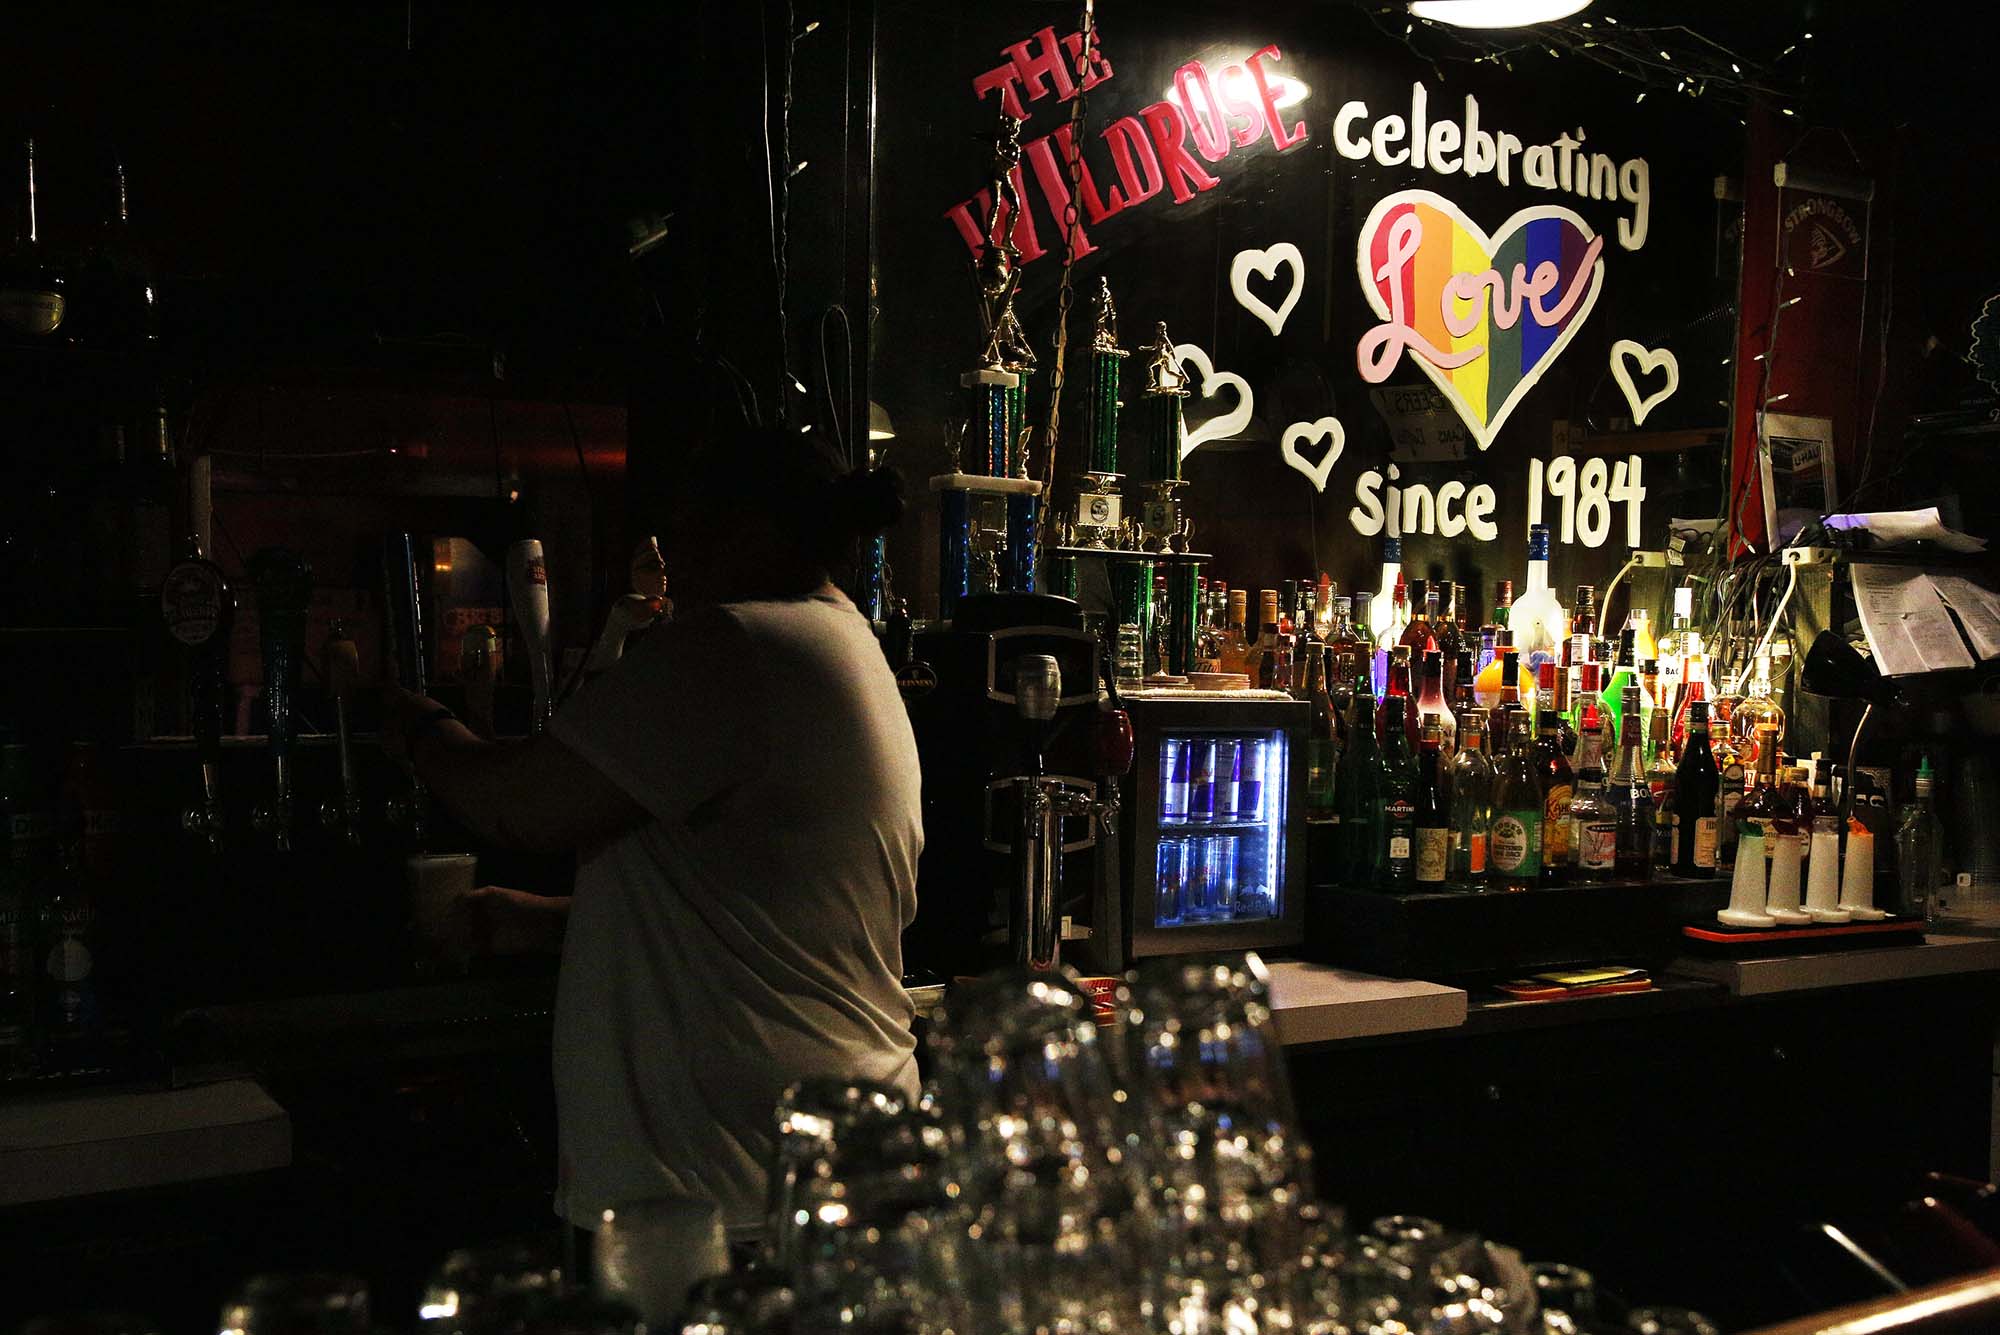 Photo of one of the oldest lesbian bars in the country, Wildrose in Capitol Hill taken Sept. 14, 2016. The bar is dimly lit. In the photo, a bartender in a white shirt, with their back to the camera, fills up a bar at a tap. Behind the bar, a mirror is decorated with window paint that reads "The Wildrose, celebrating Love since 1984." The word "love" is inside a rainbow heart and smaller white hearts encircle the larger heart.